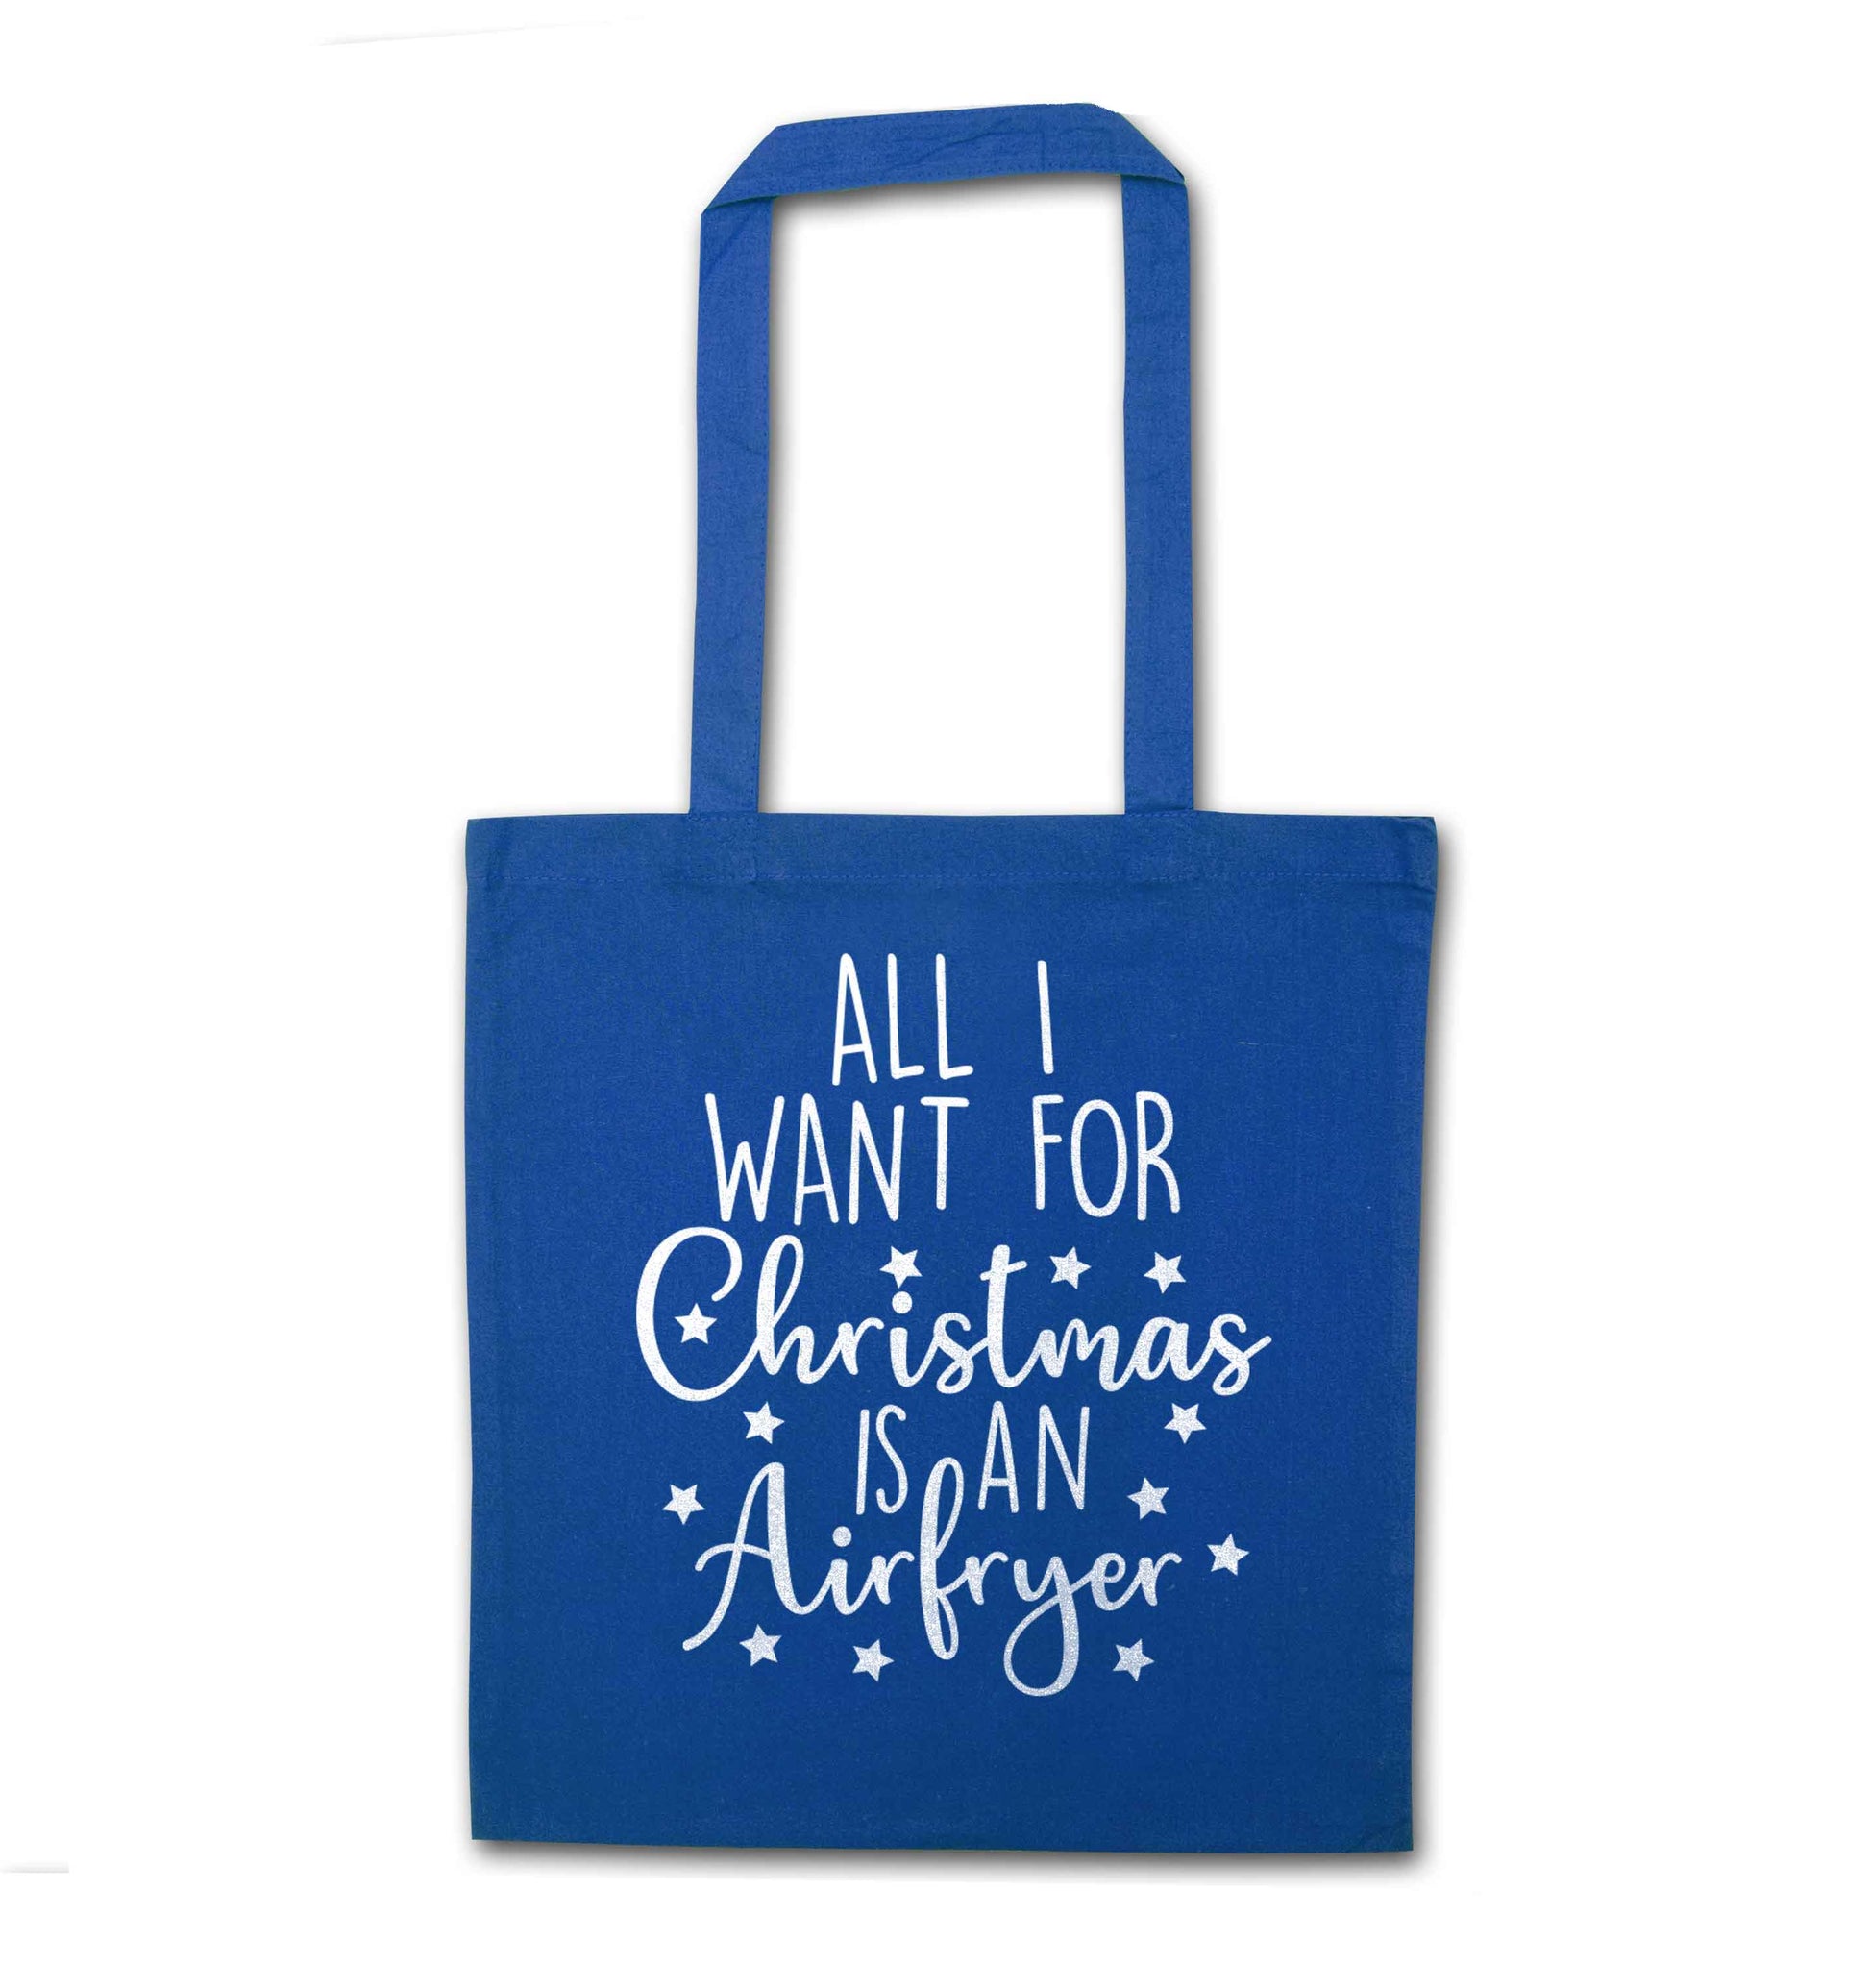 All I want for Christmas is an airfryerblue tote bag